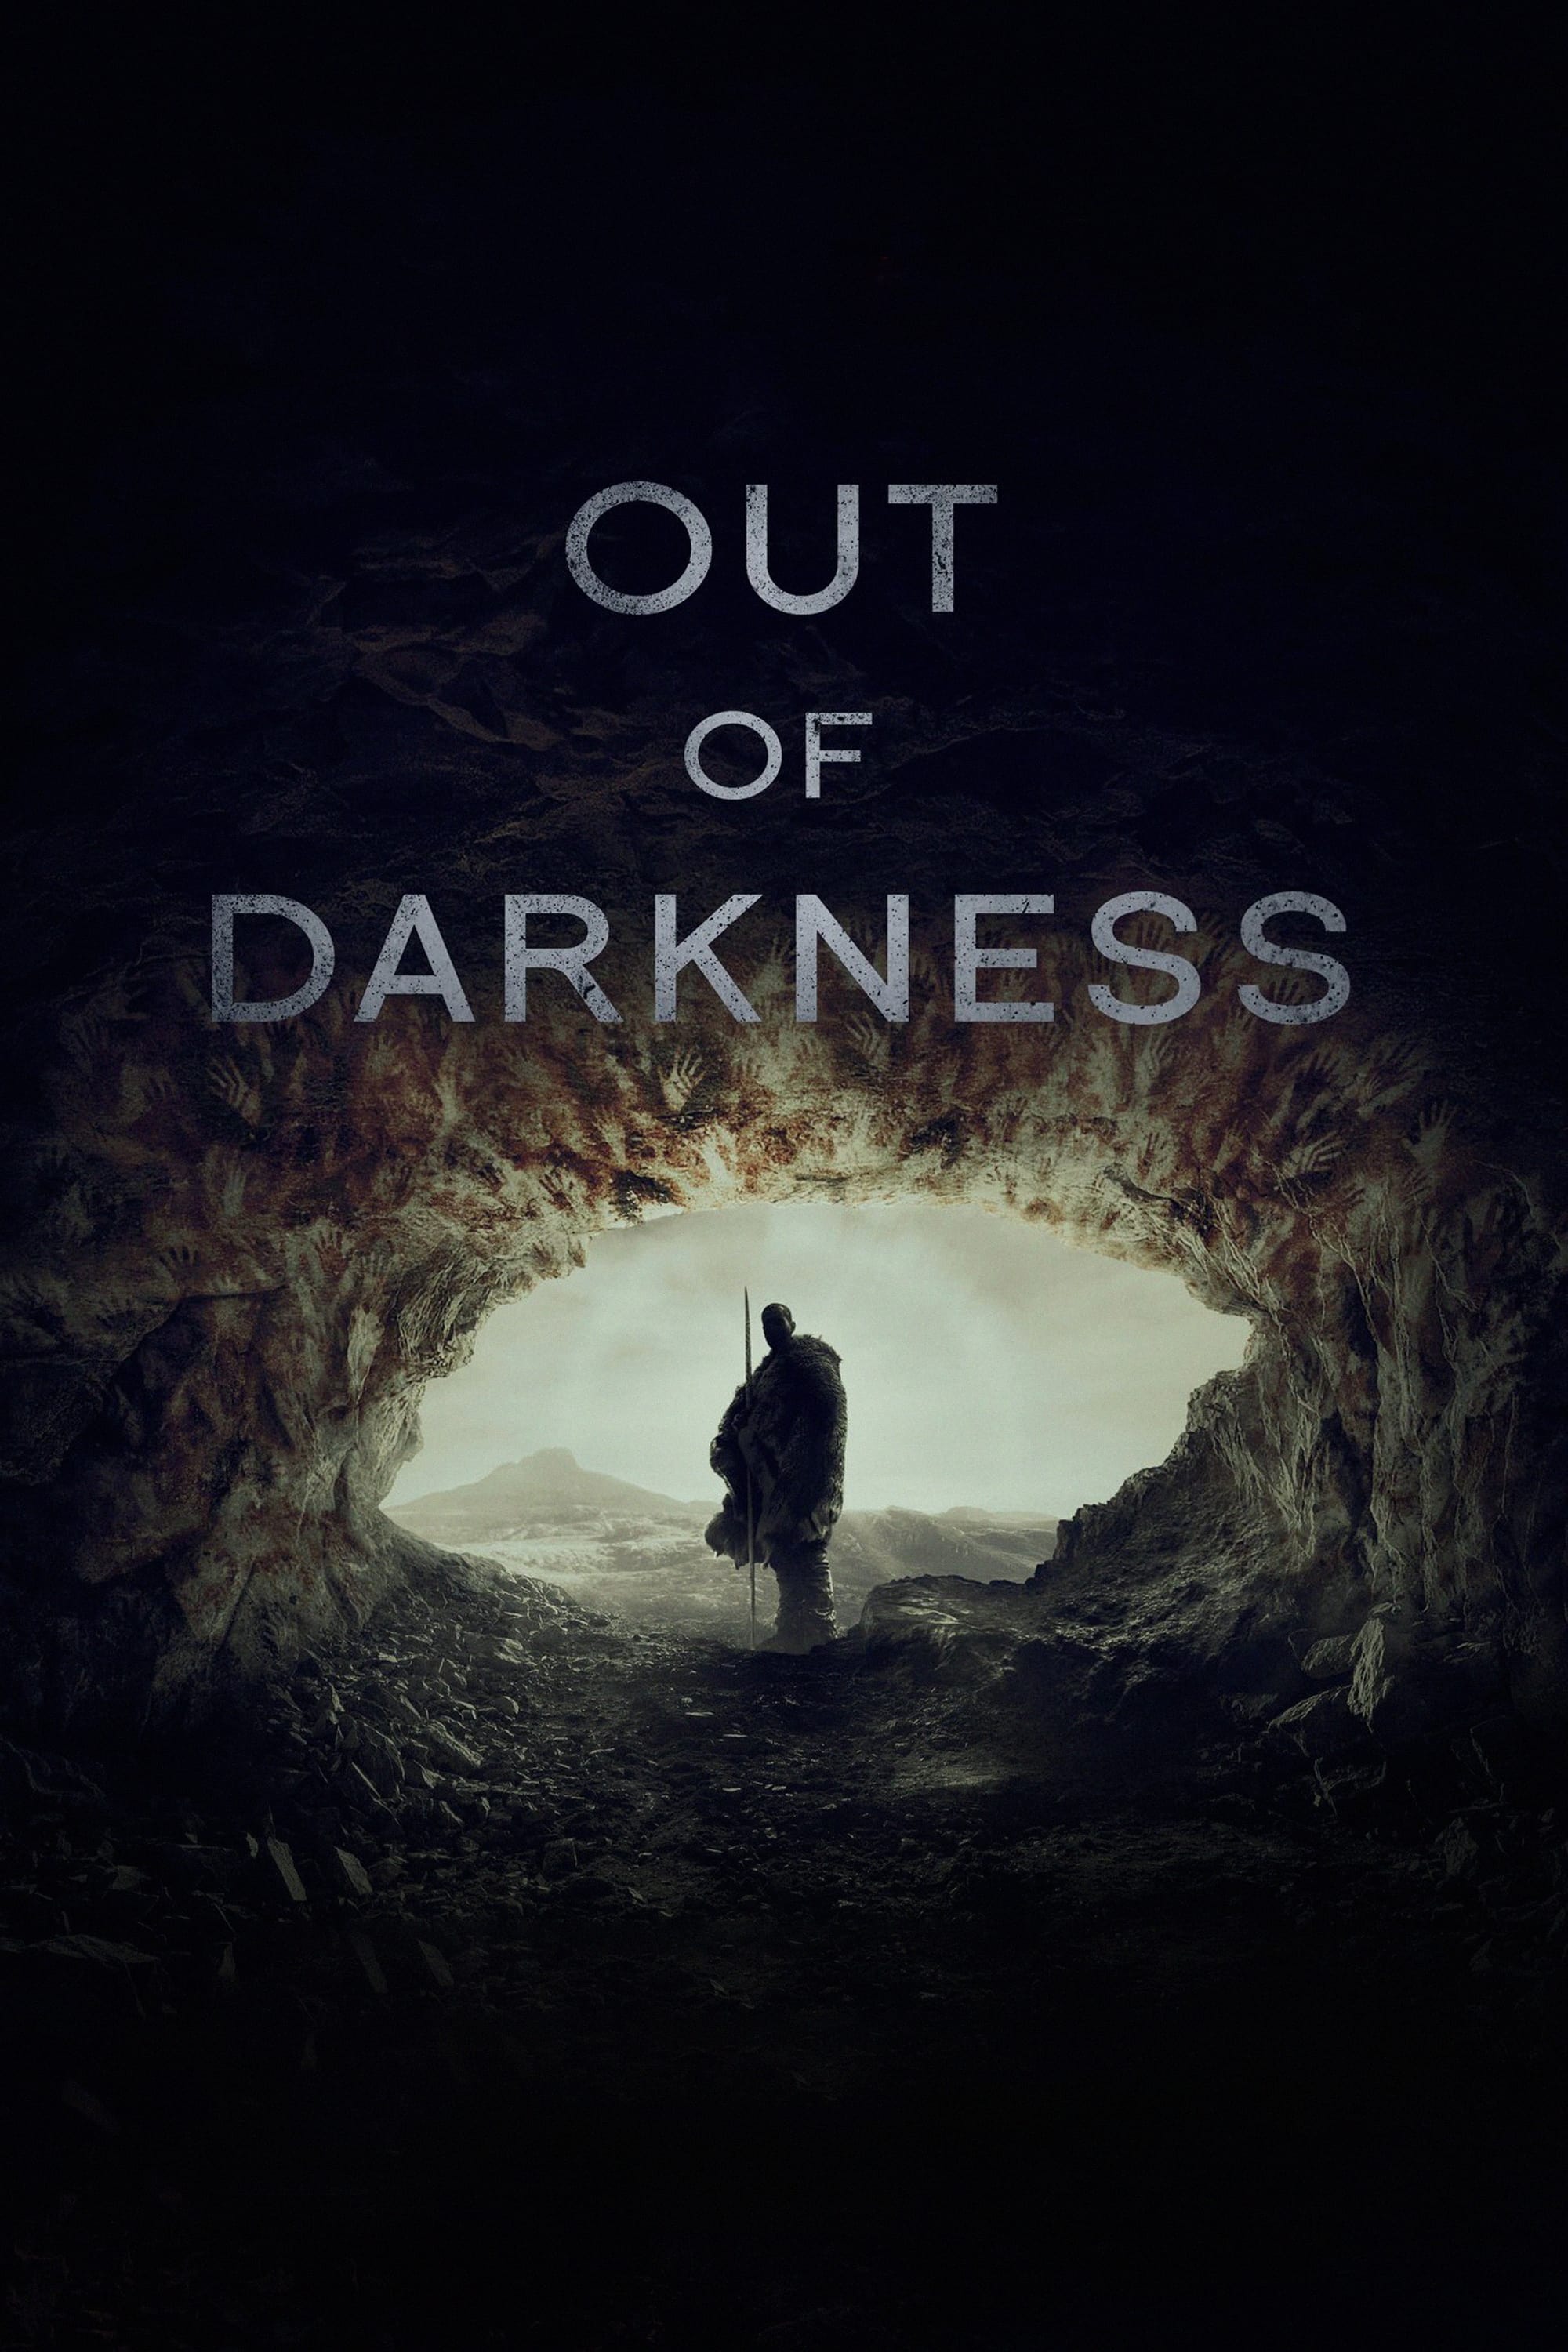 Poster for the movie "Out of Darkness"